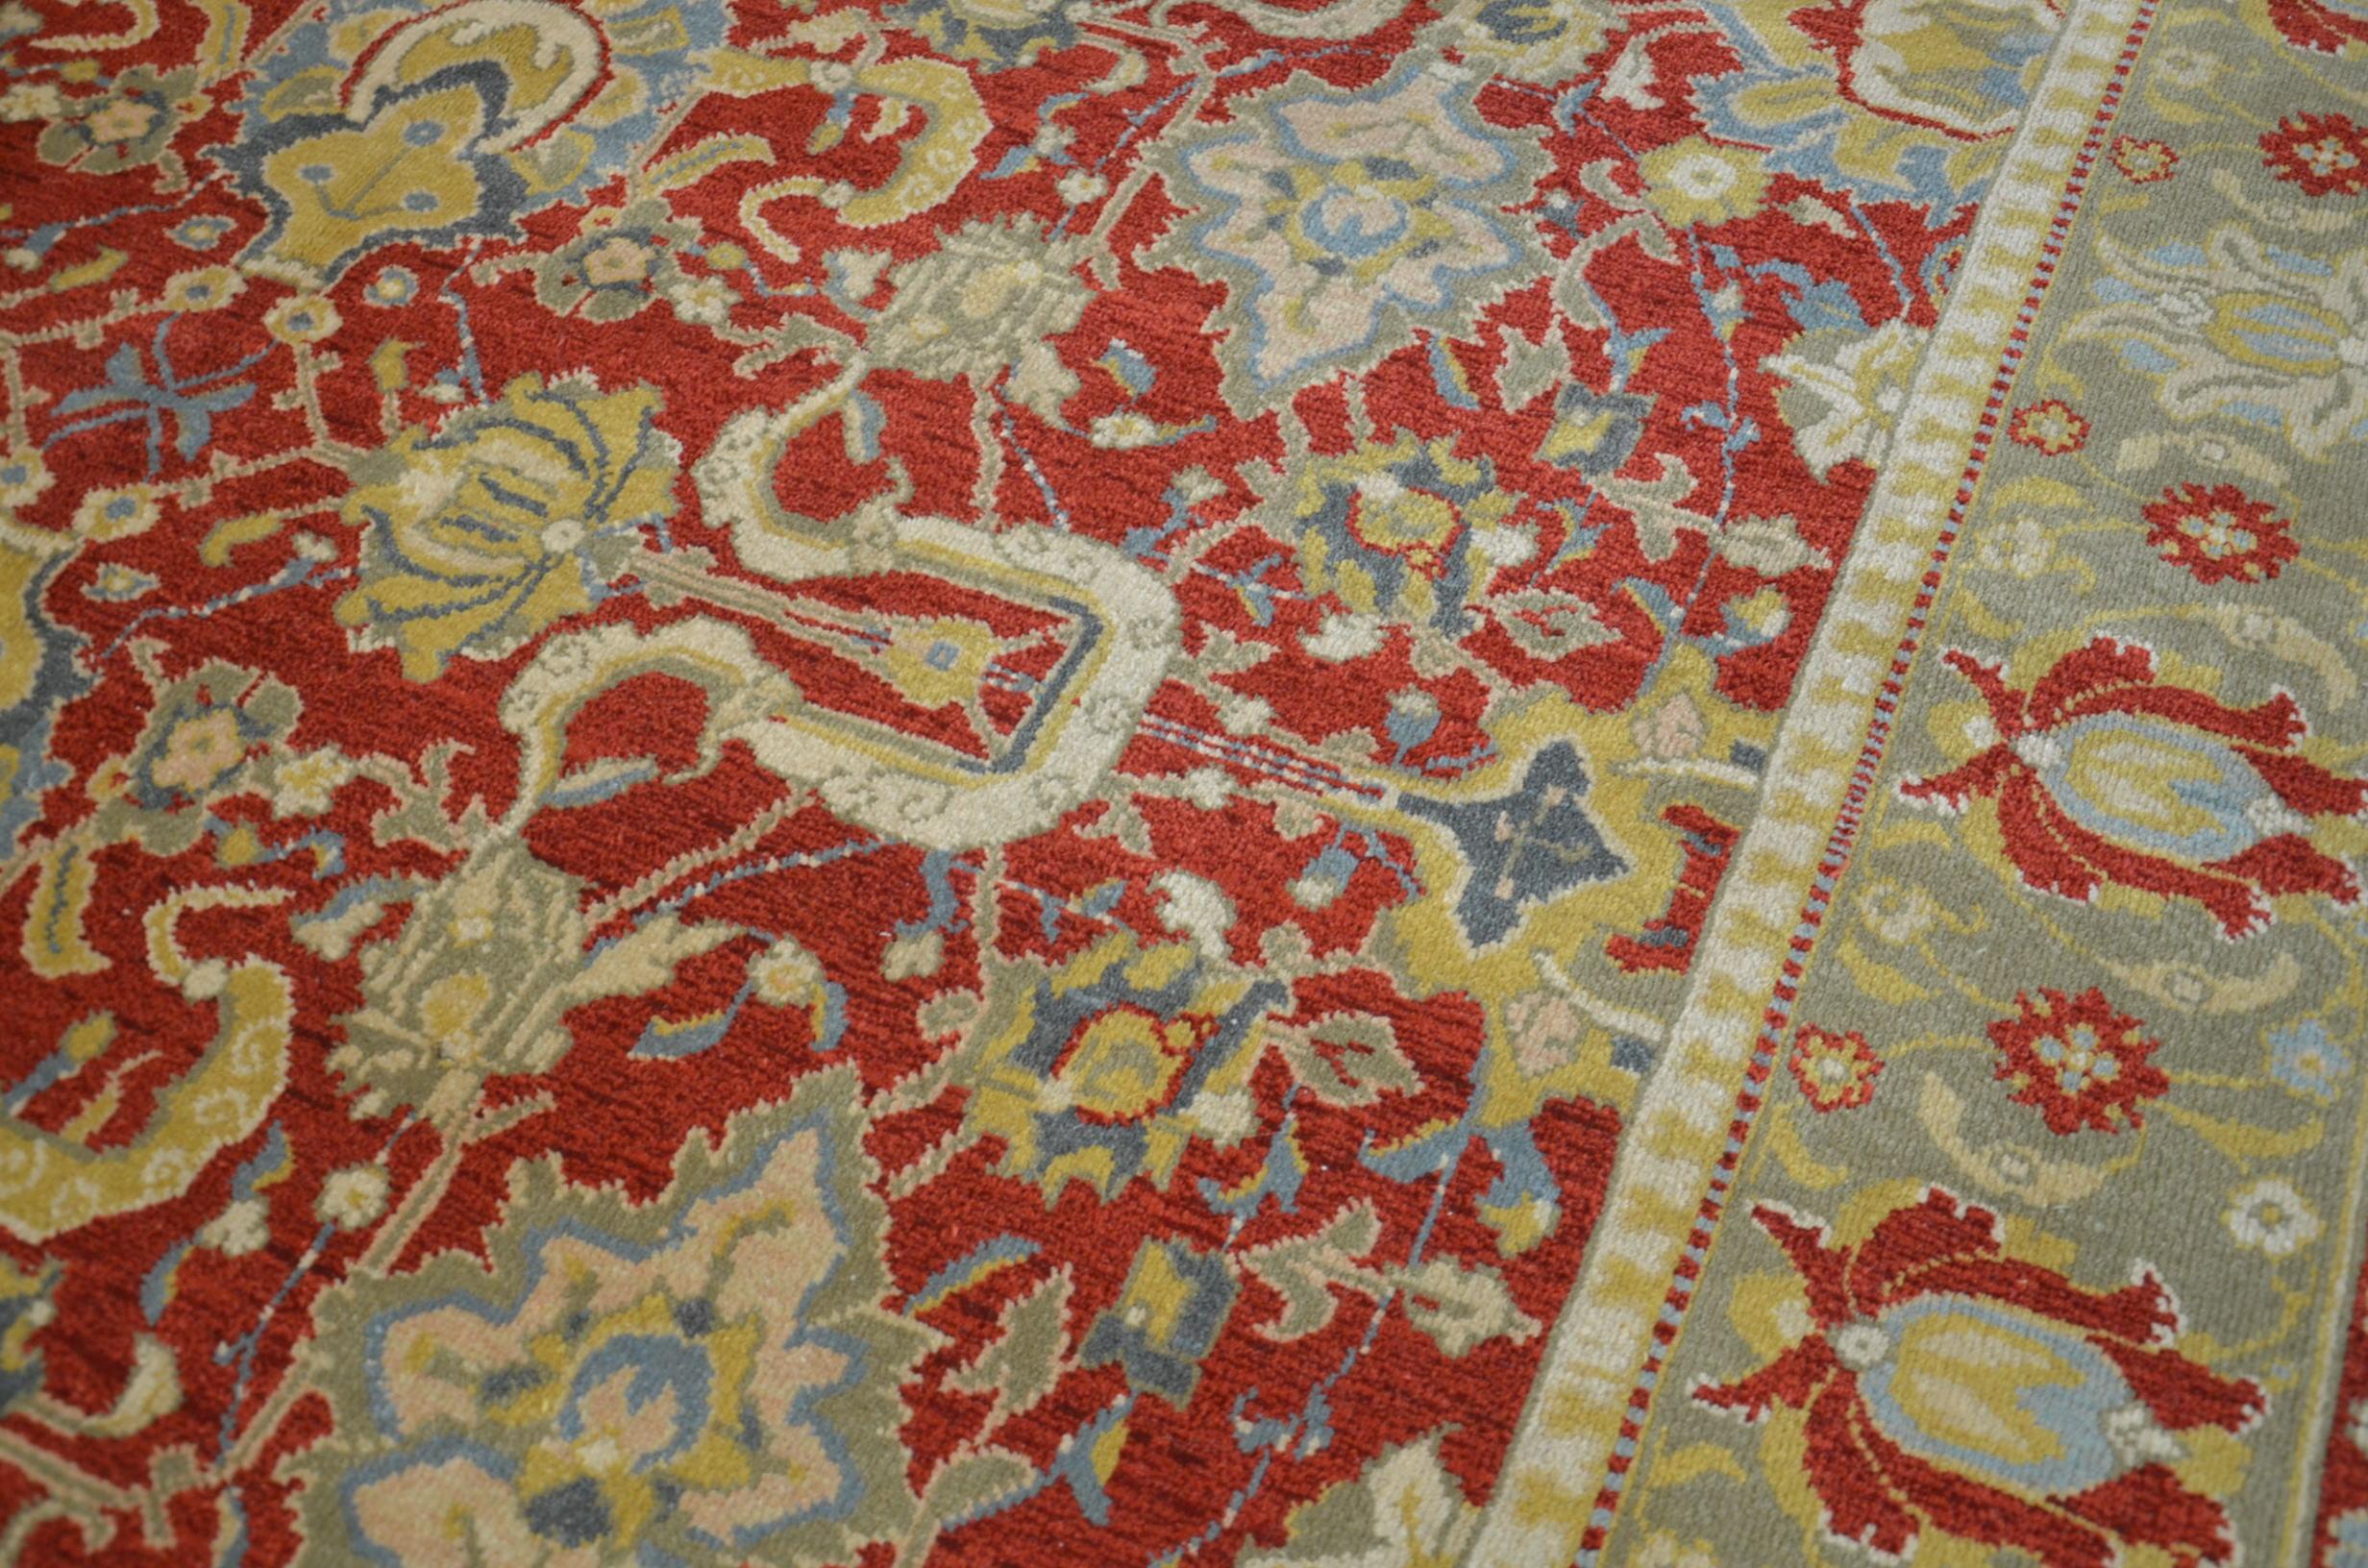 Indian Agra India Rug. 3.20 x 2.30 m For Sale